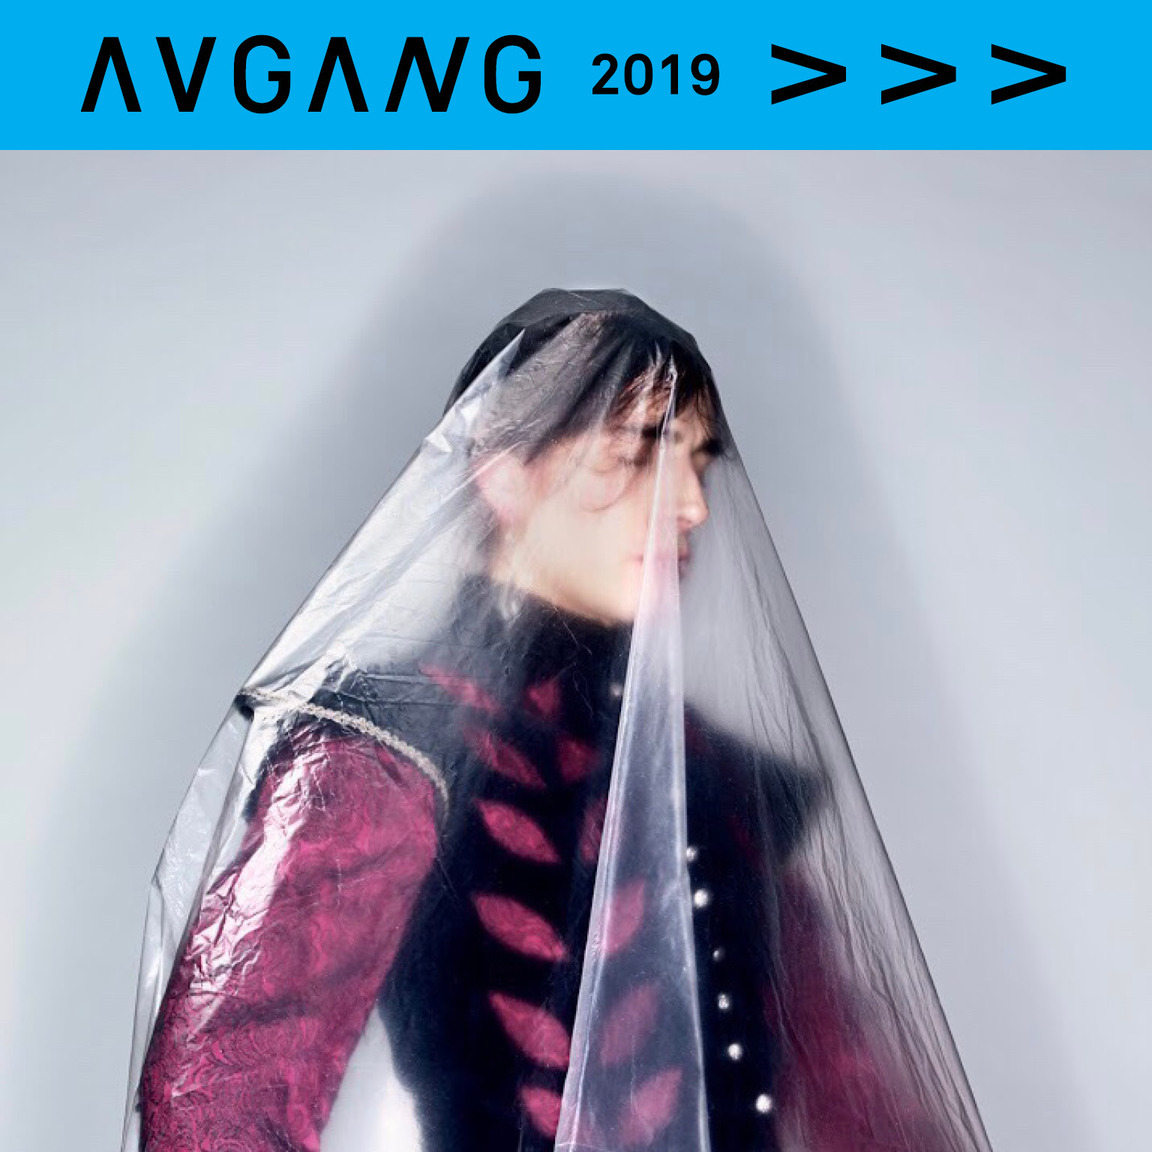 AVGANG 2019: PRESENTATIONS edt. 1.1.–1.4.  Performing the self in the self(ie) society